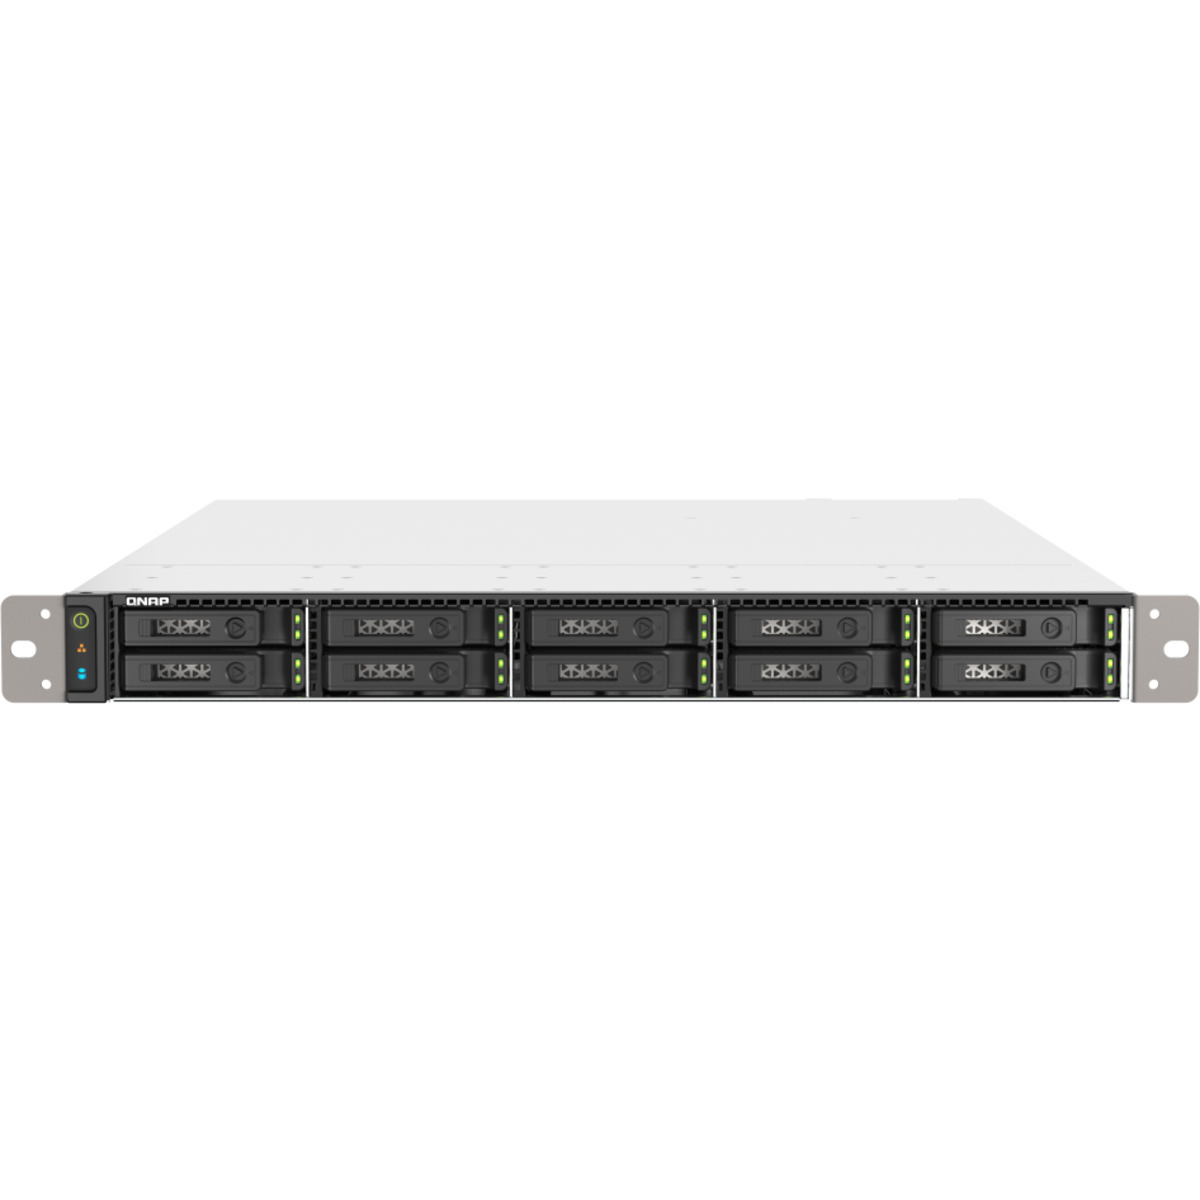 QNAP TS-h1090FU-7232P 32tb 10-Bay RackMount Large Business / Enterprise NAS - Network Attached Storage Device 8x4tb Crucial P3 Plus CT4000P3PSSD8  4800/4100MB/s M.2 2280 NVMe SSD CONSUMER Class Drives Installed - Burn-In Tested TS-h1090FU-7232P